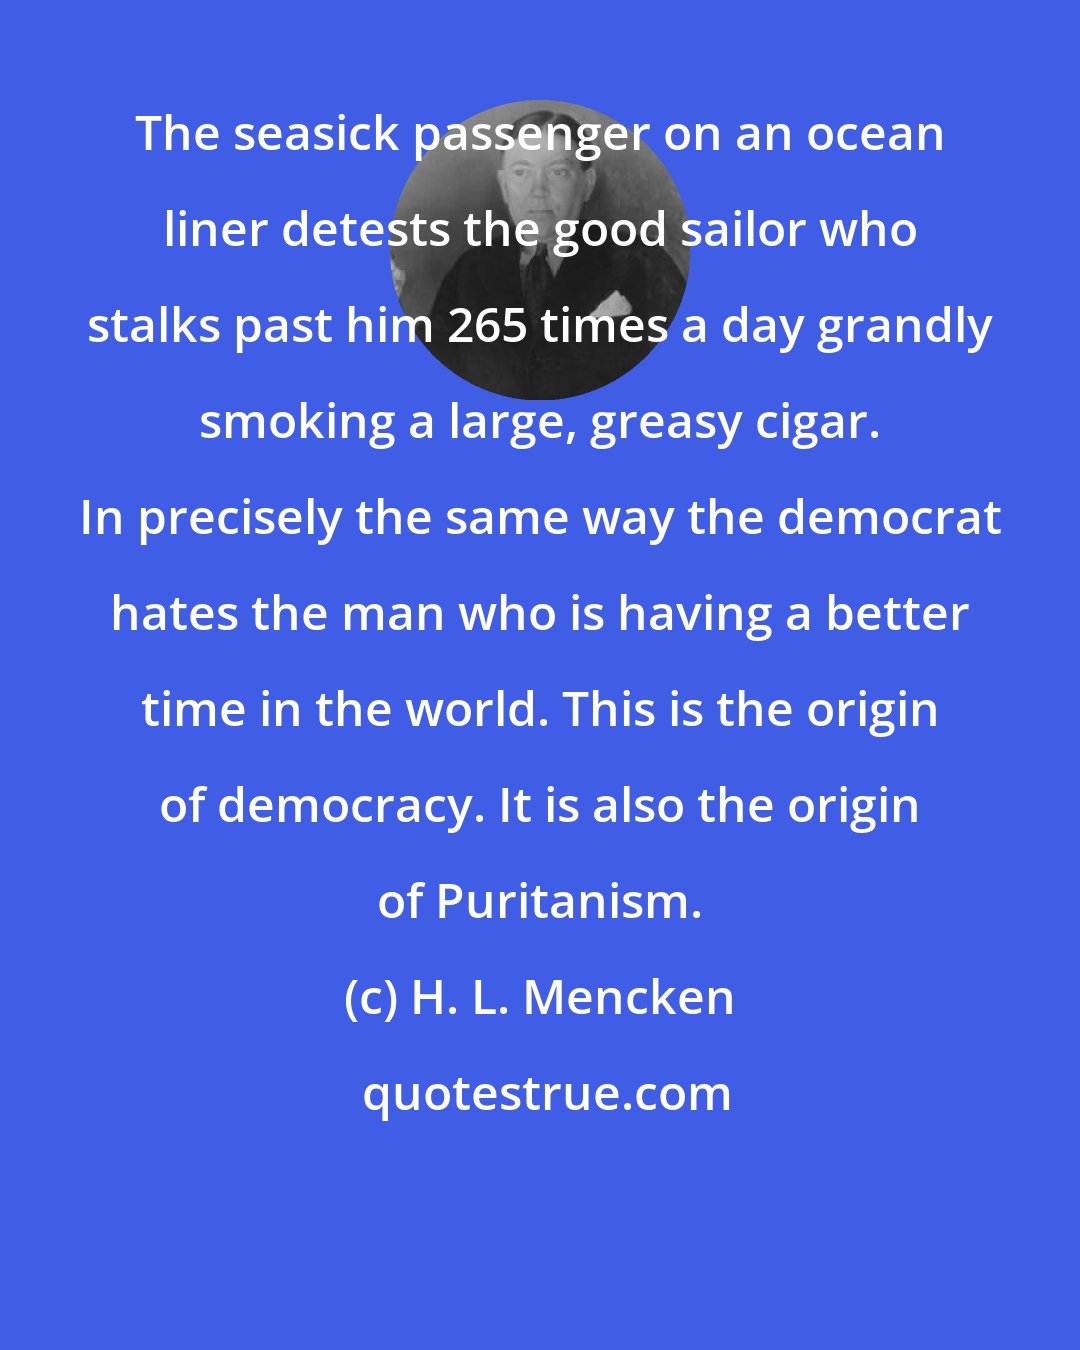 H. L. Mencken: The seasick passenger on an ocean liner detests the good sailor who stalks past him 265 times a day grandly smoking a large, greasy cigar. In precisely the same way the democrat hates the man who is having a better time in the world. This is the origin of democracy. It is also the origin of Puritanism.